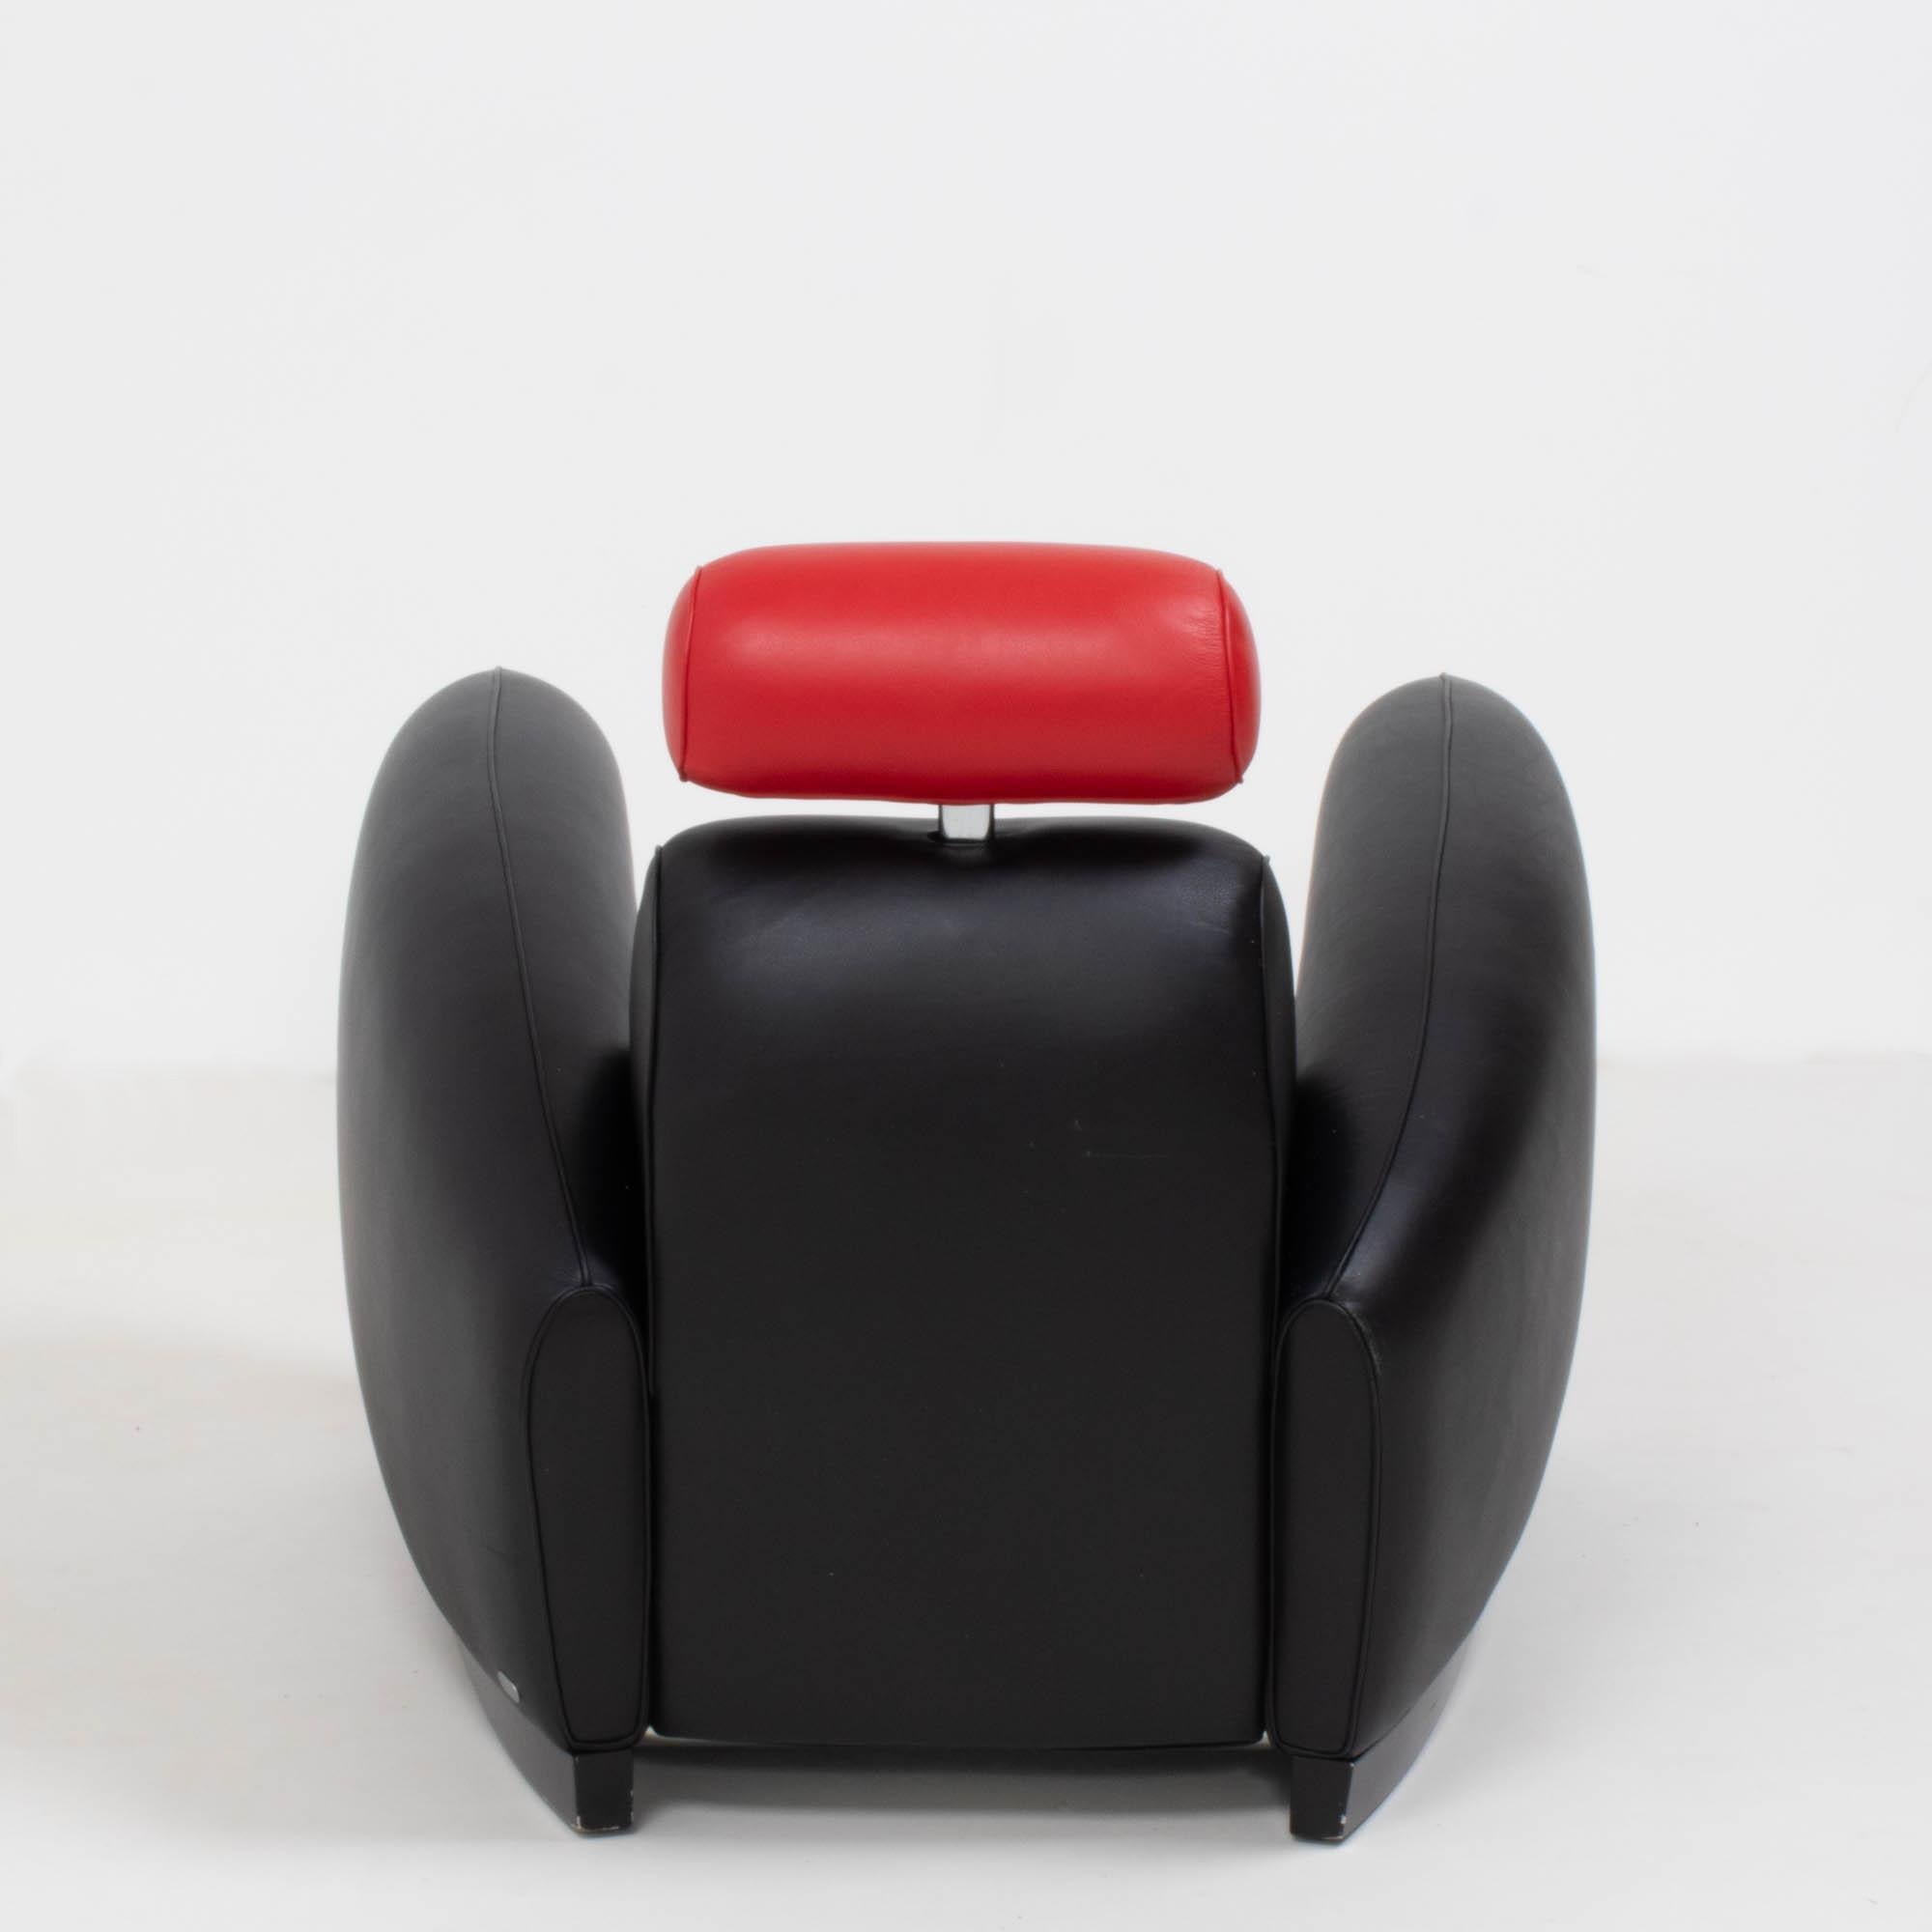 Swiss De Sede by Franz Romero DS-57 Black and Red Leather Armchair For Sale